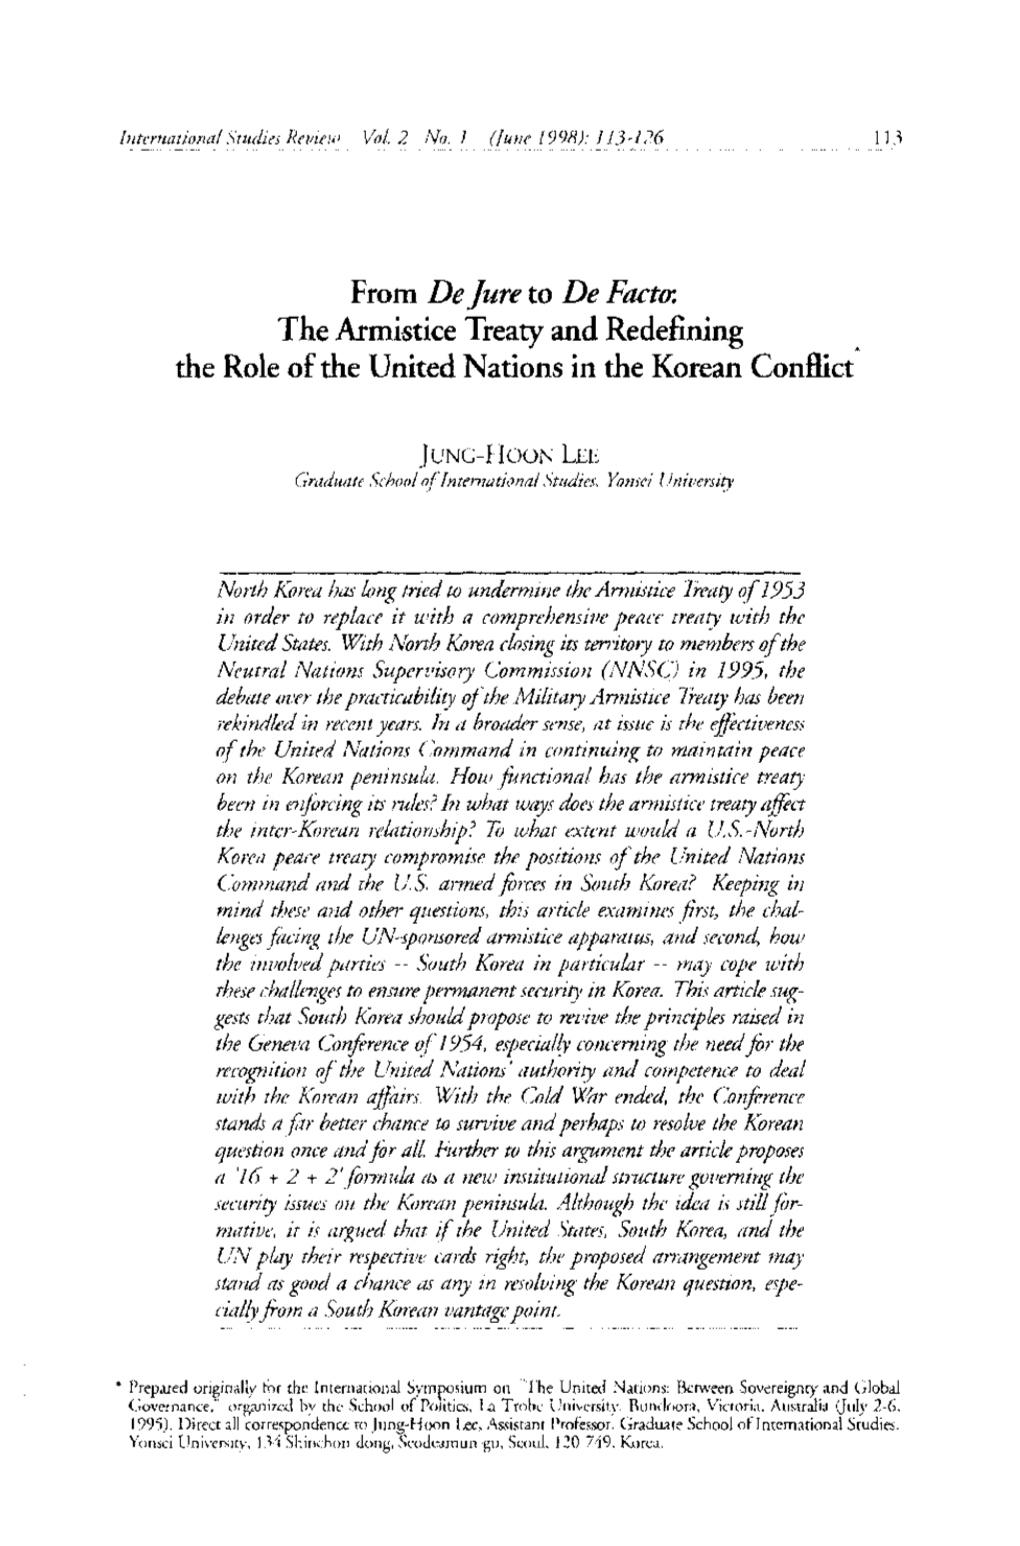 From De Jure to De Facto: the Armistice Treaty and Redefining * the Role of the United Nations in the Korean Conflict